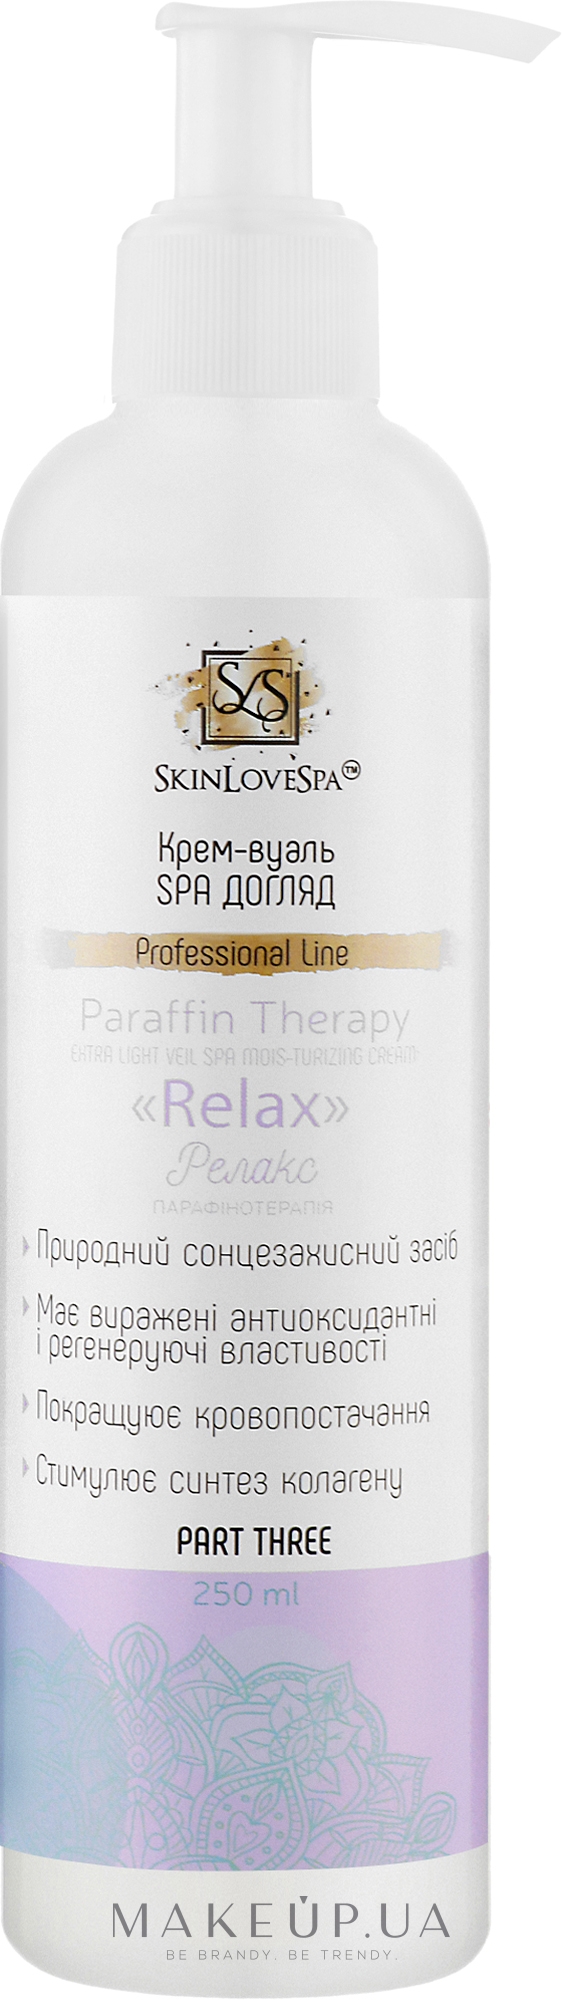 Крем-вуаль "Relax" - SkinLoveSpa Paraffin Therapy — фото 250ml